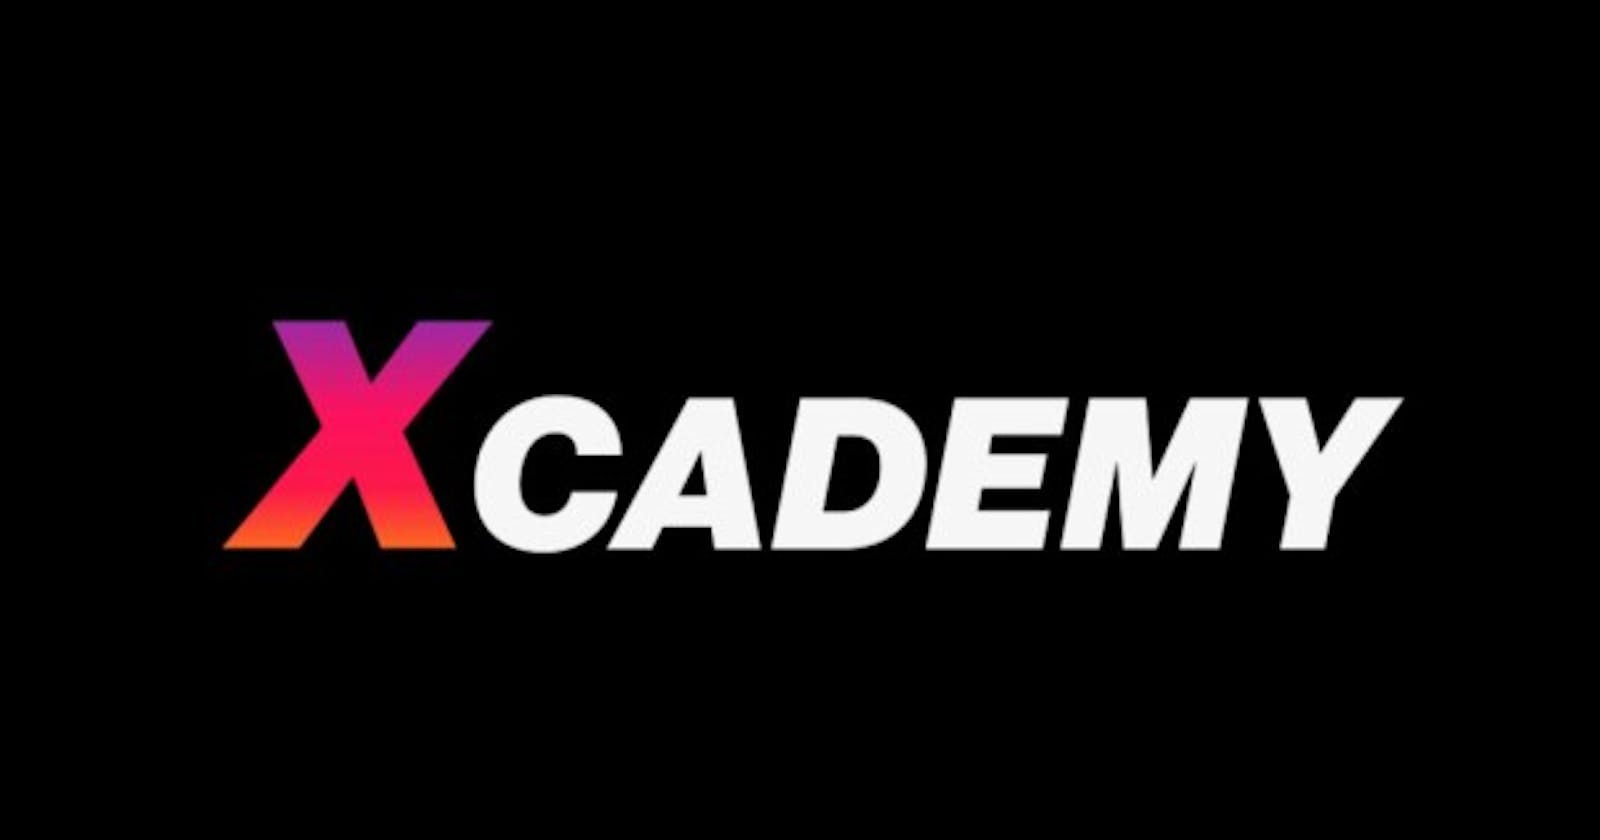 XCADEMY - Watch to Earn!